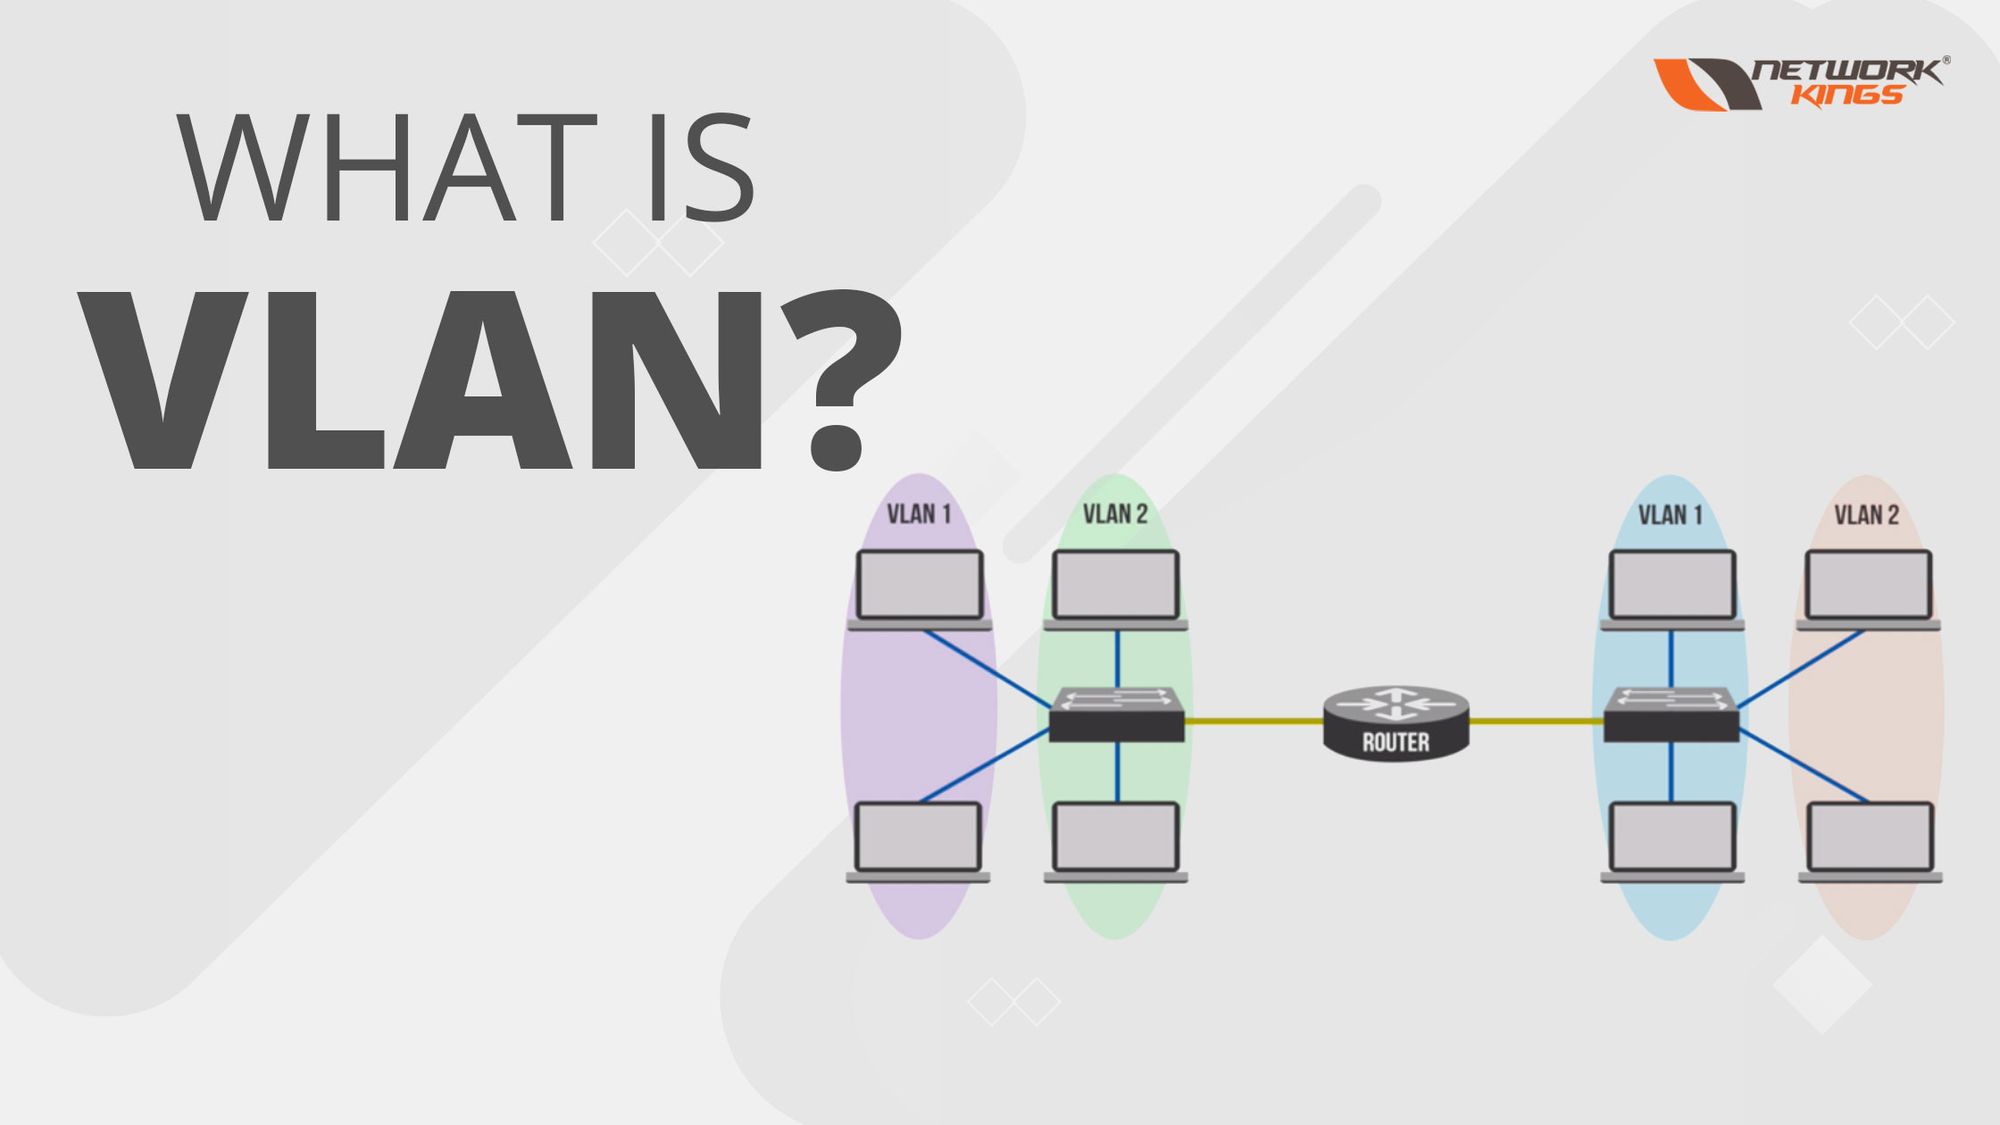 What is VLAN?